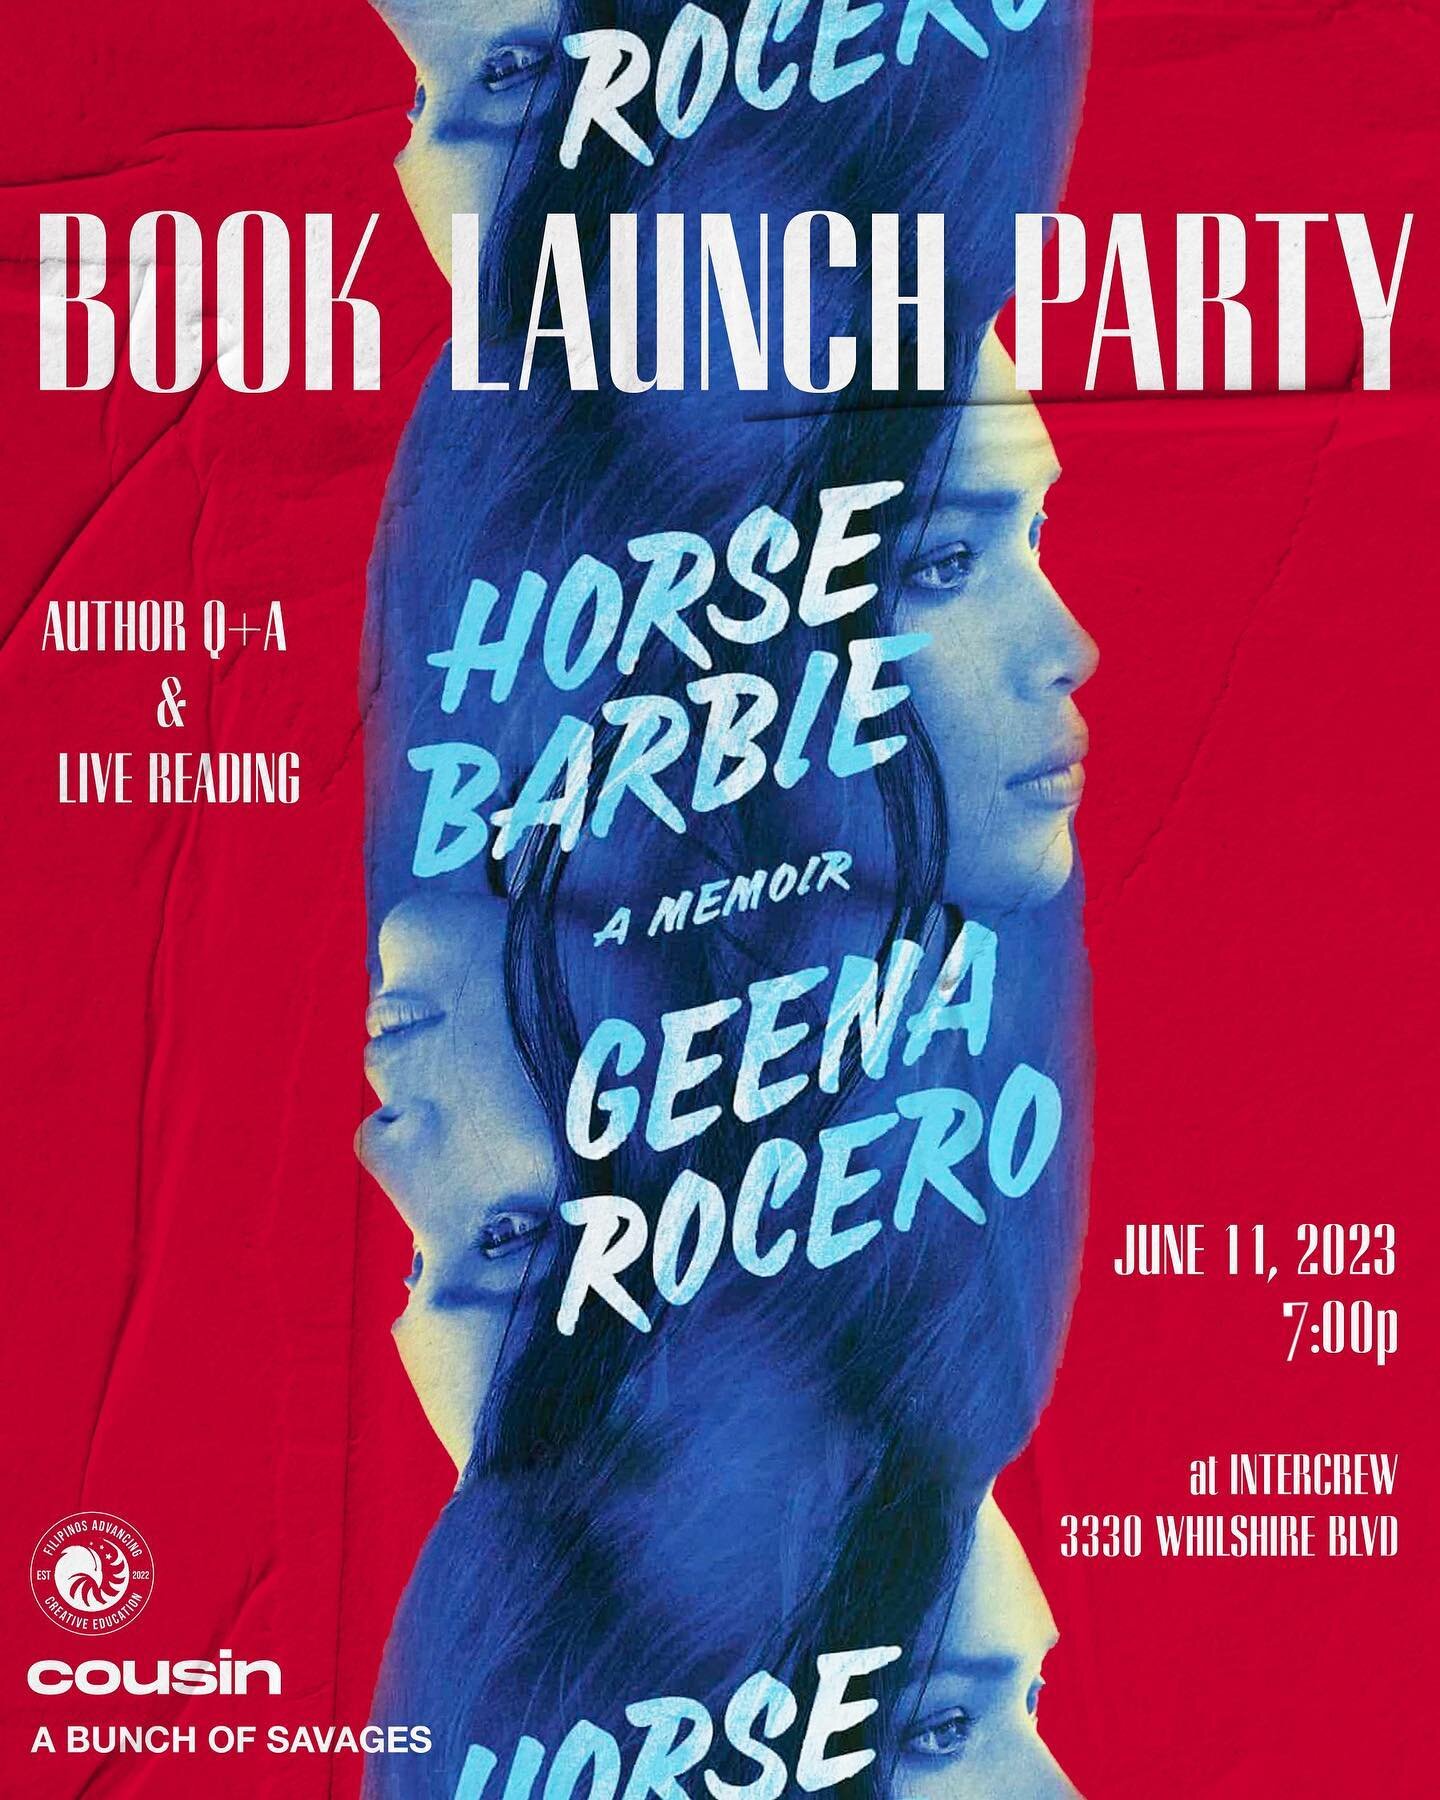 Friends! 🎉 Come through to Intercrew this Sunday as we celebrate the launch of @geenarocero&rsquo;s memoir, Horse Barbie! Join @your.firstfriend @facefwdorg and yours truly as we party in style in honor of Geena's iconic journey. ✨

Find inspiration